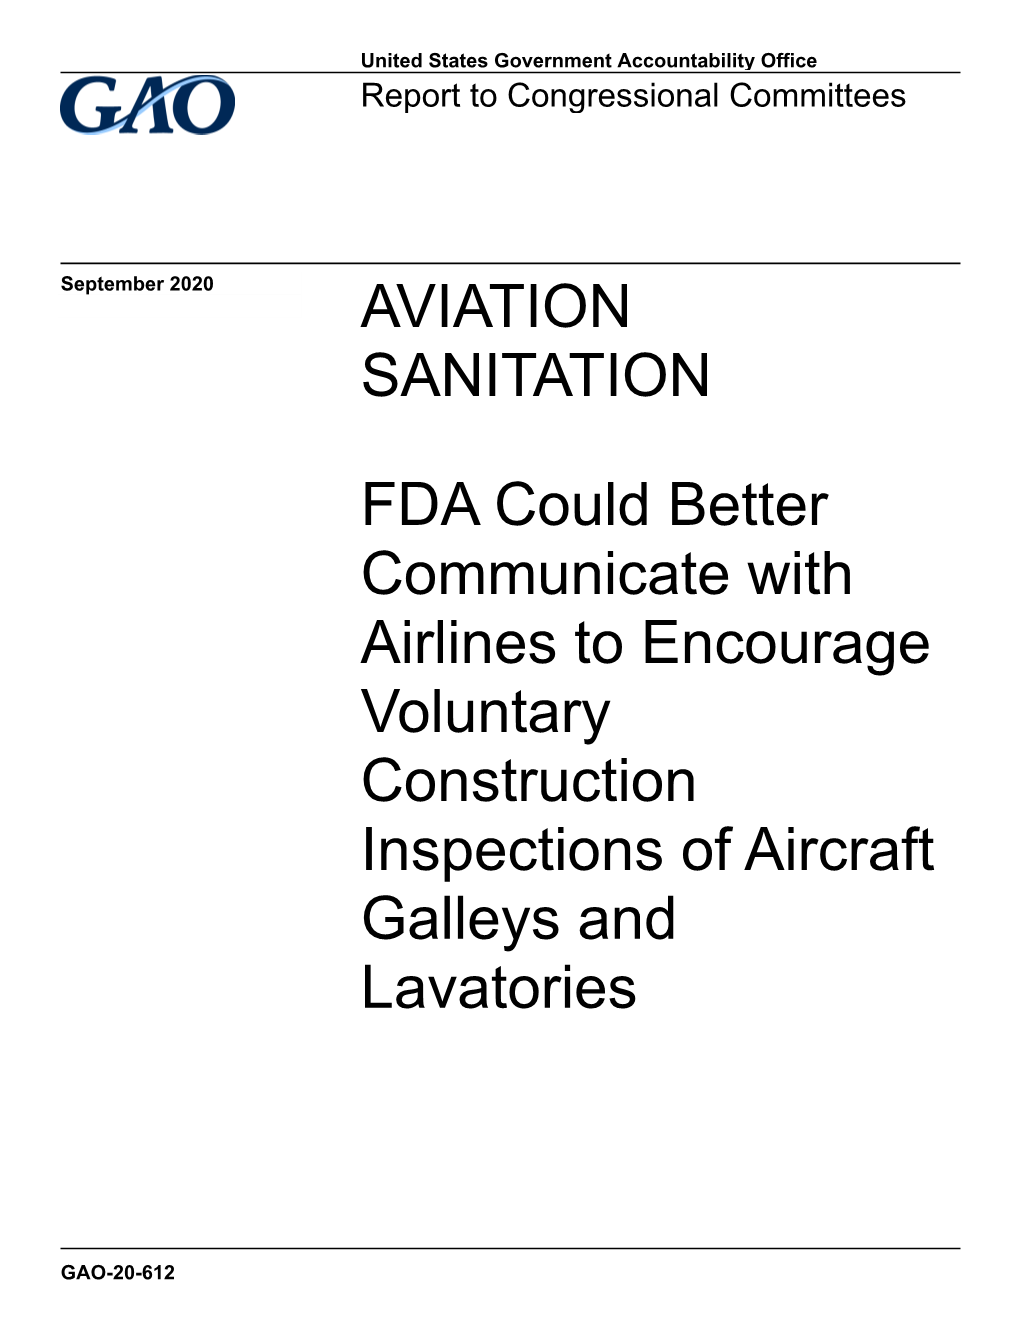 FDA Could Better Communicate with Airlines to Encourage Voluntary Construction Inspections of Aircraft Galleys and Lavatories